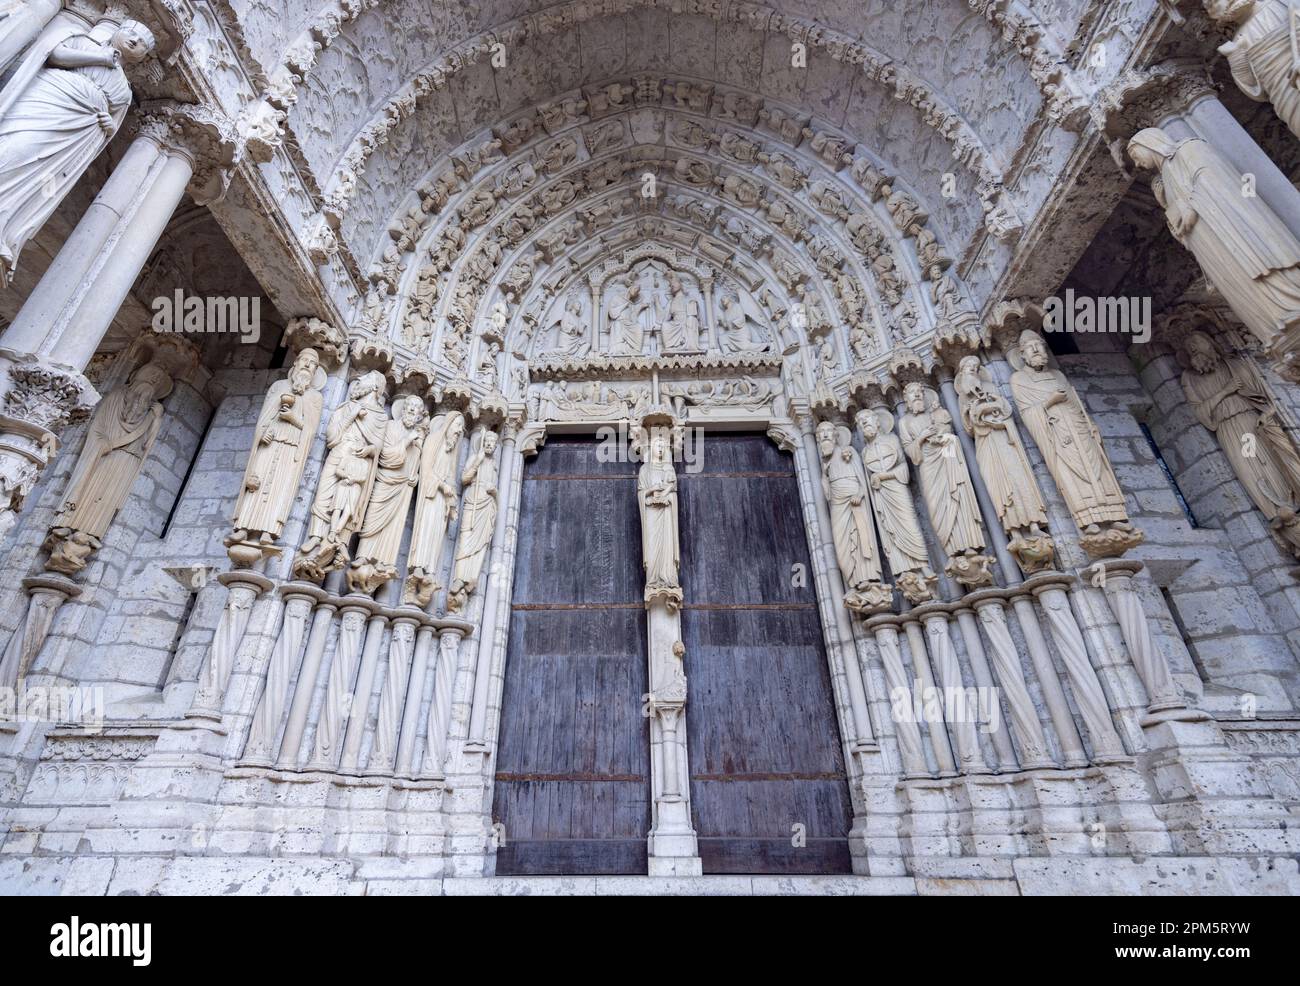 central doorway, north transept portal, Chartres cathedral, France Stock Photo